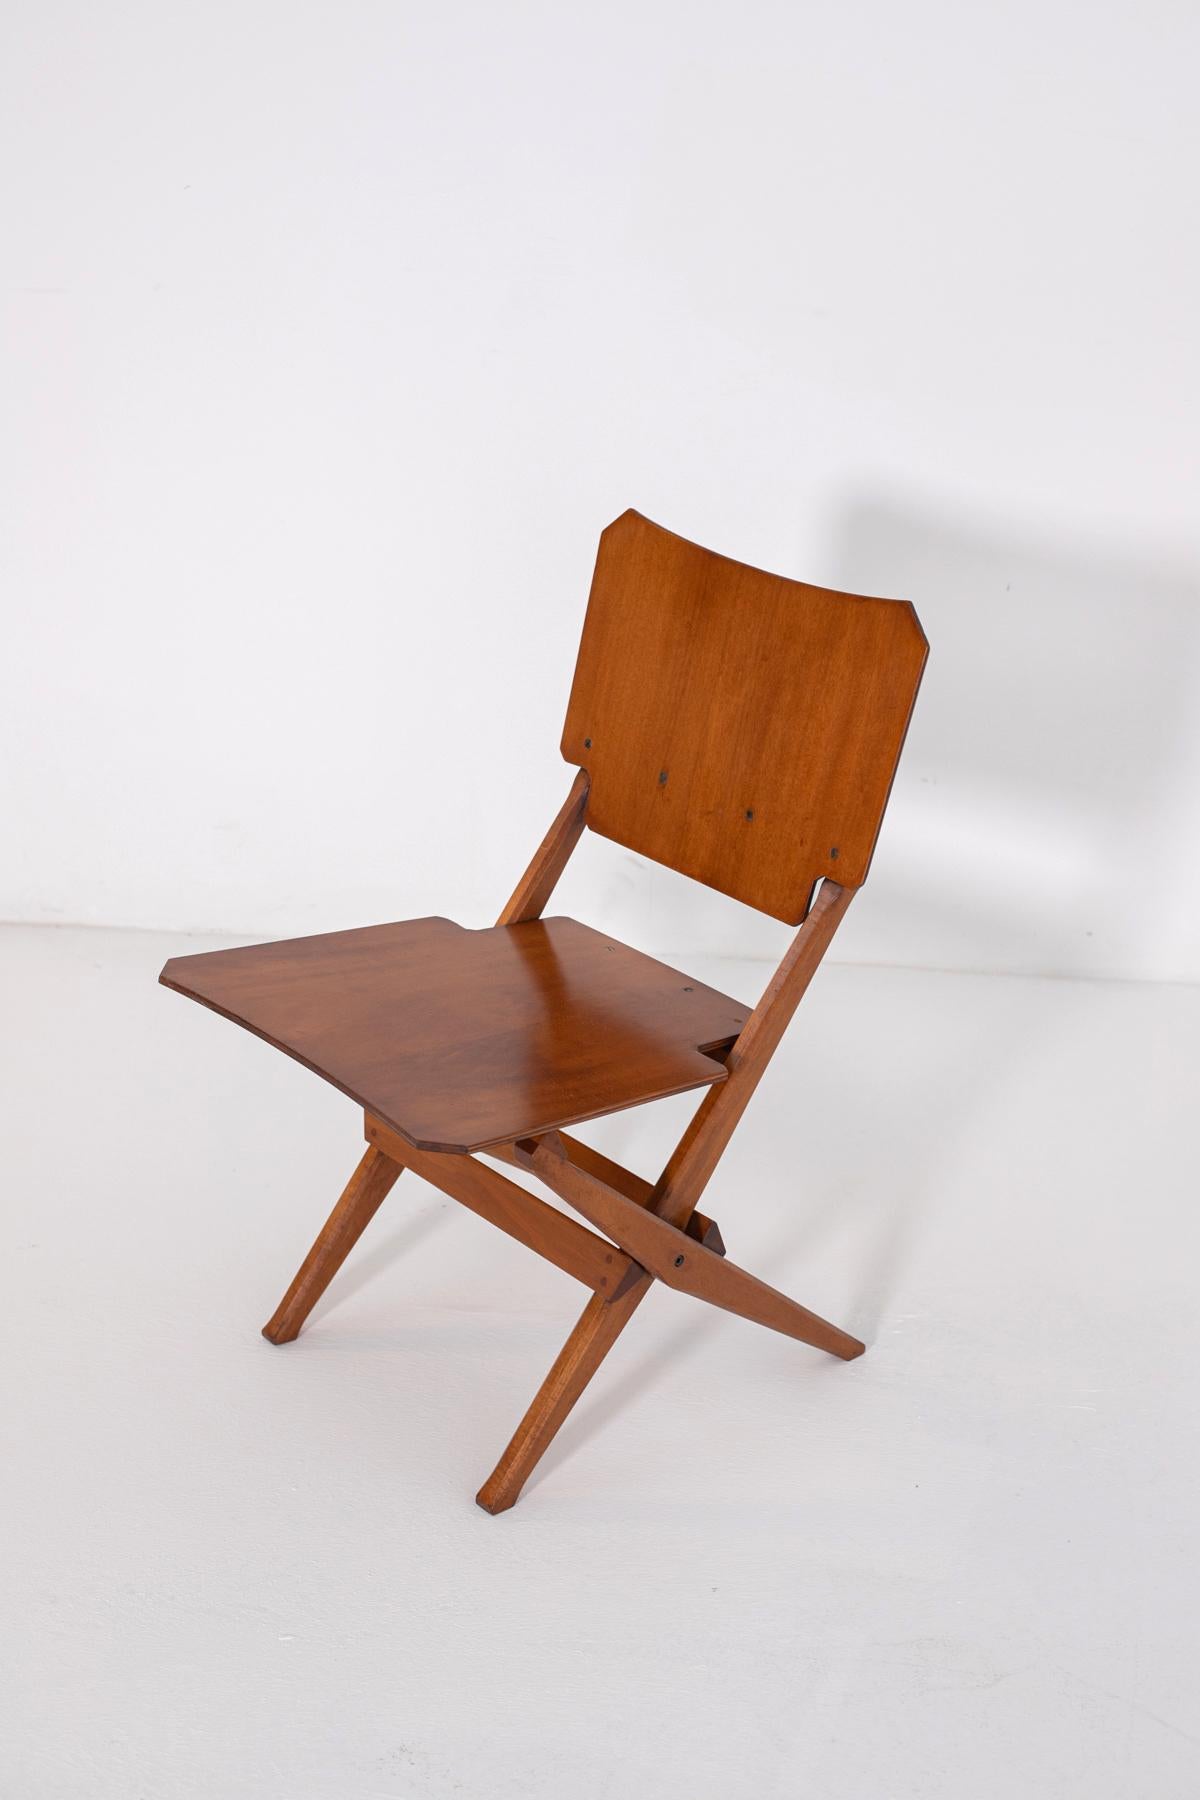 Mid-20th Century Franco Albini Pair of Vintage Wooden Chairs for Poggi